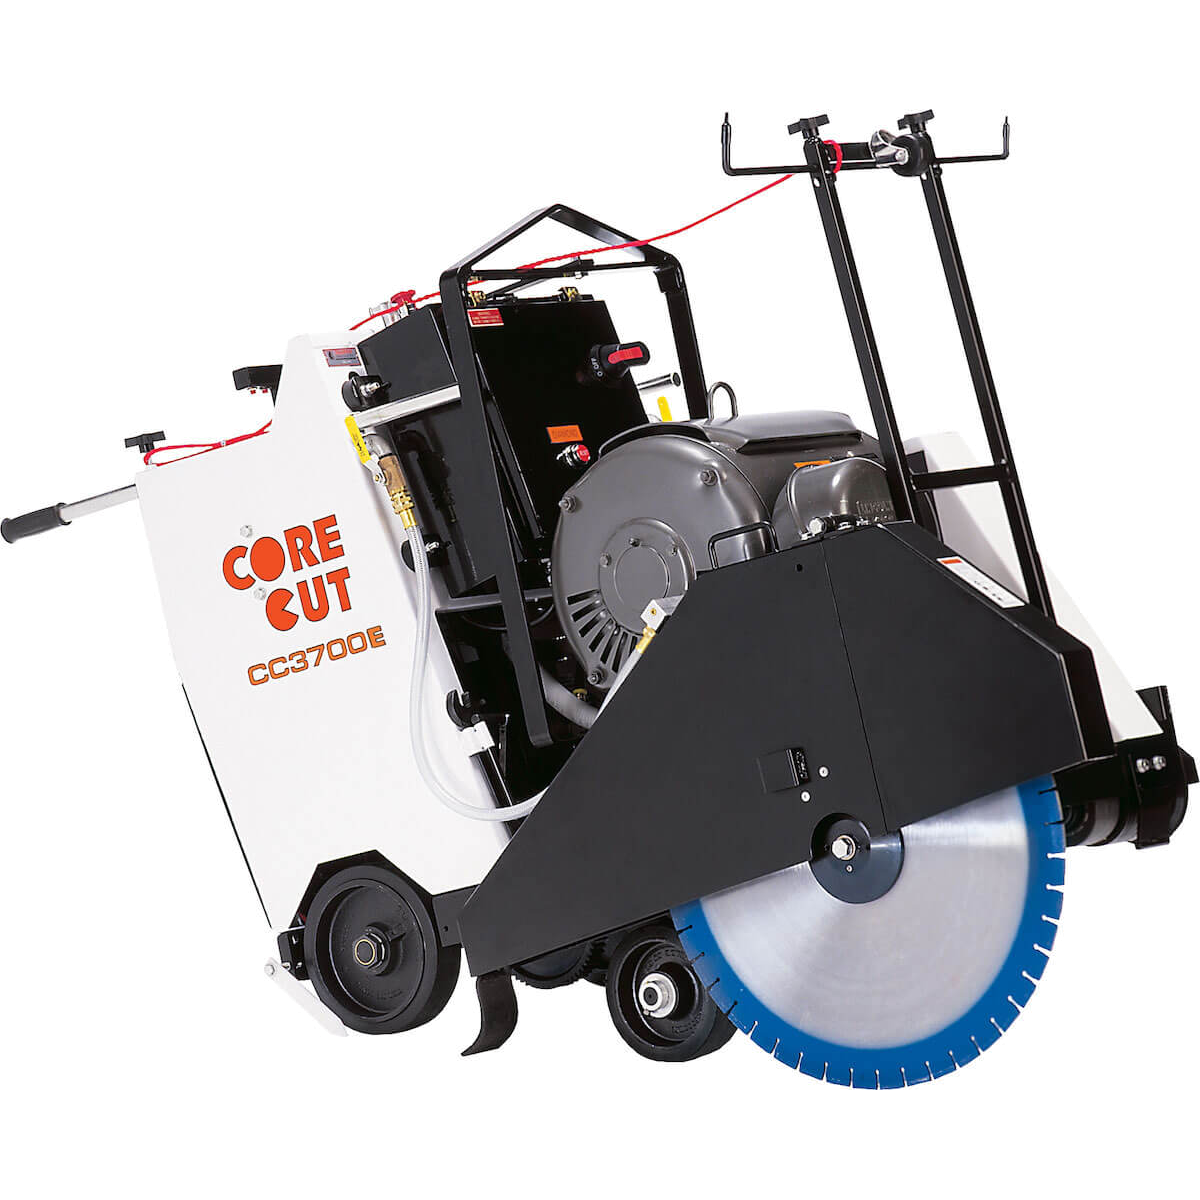 Core Cut Self-propelled saws